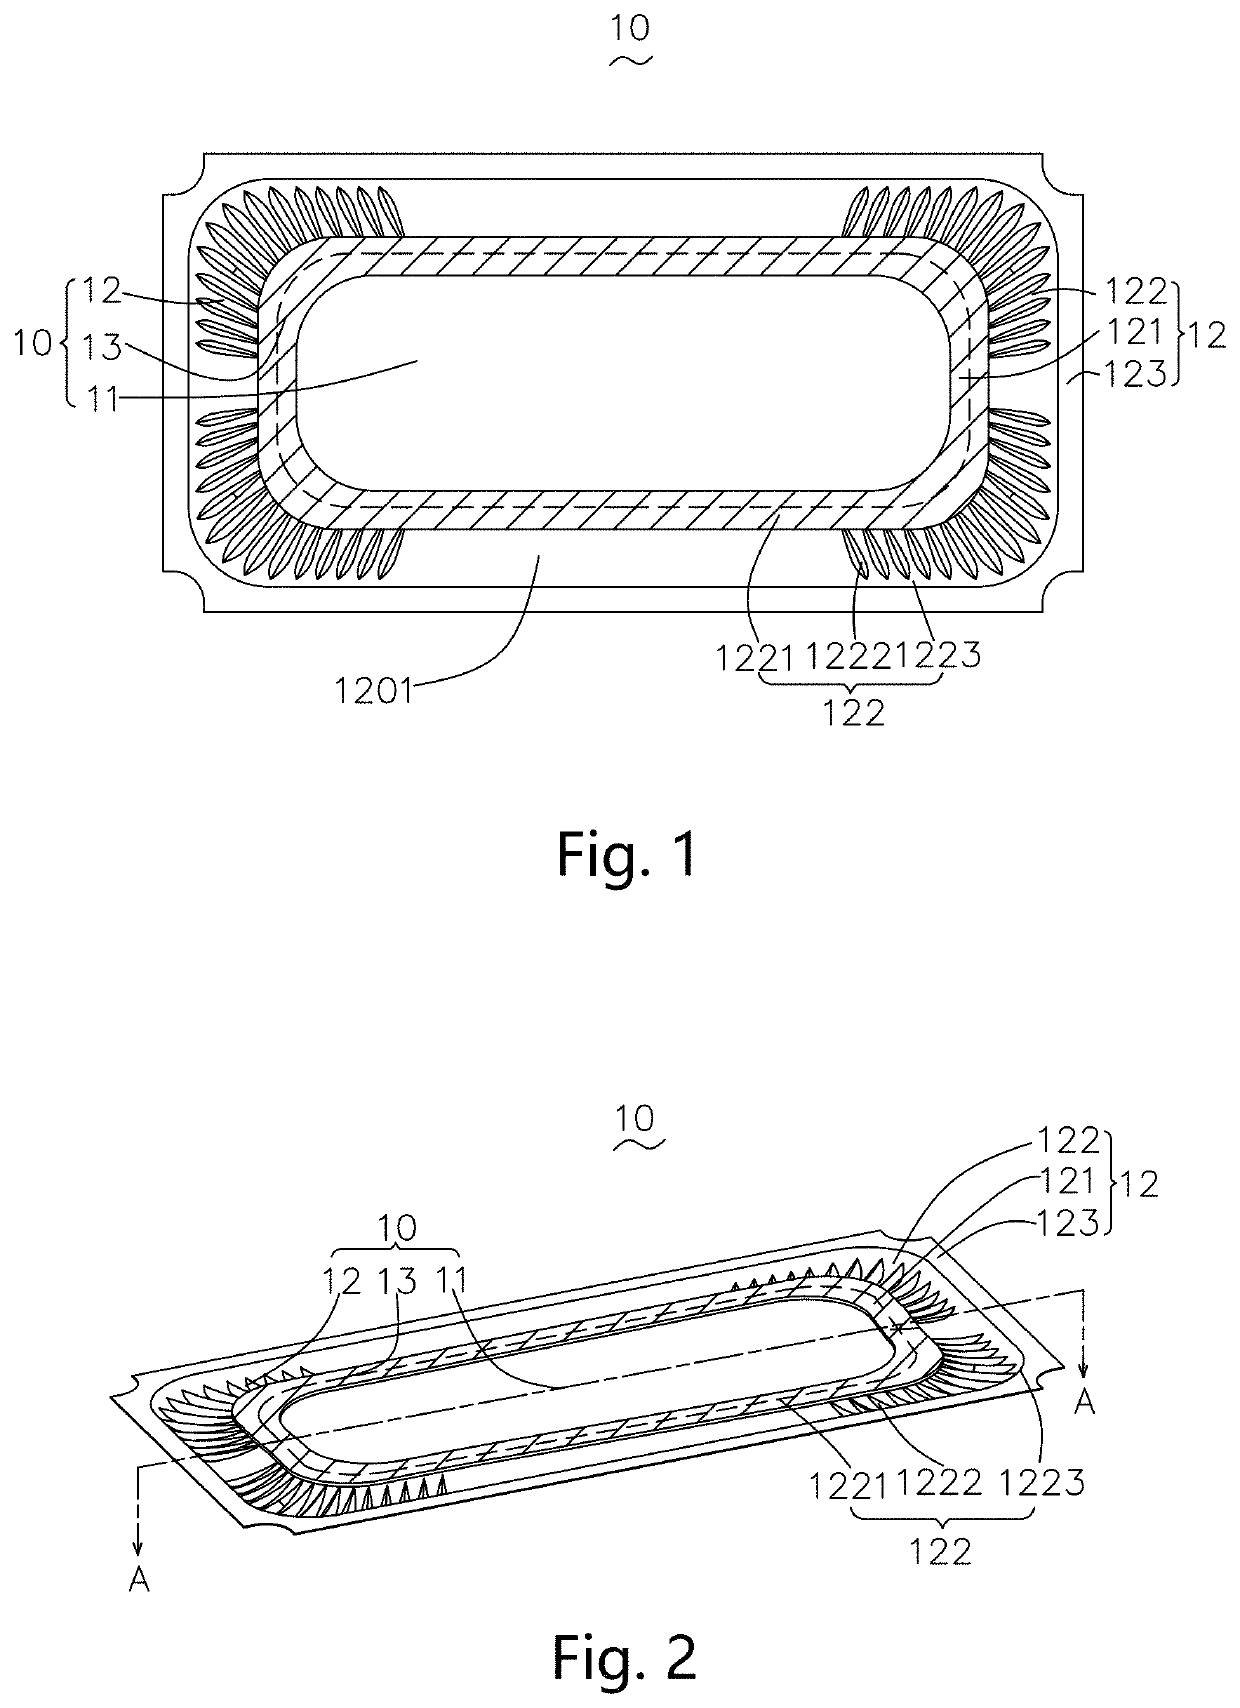 Diaphragm for Producing sound and Speaker Using Same